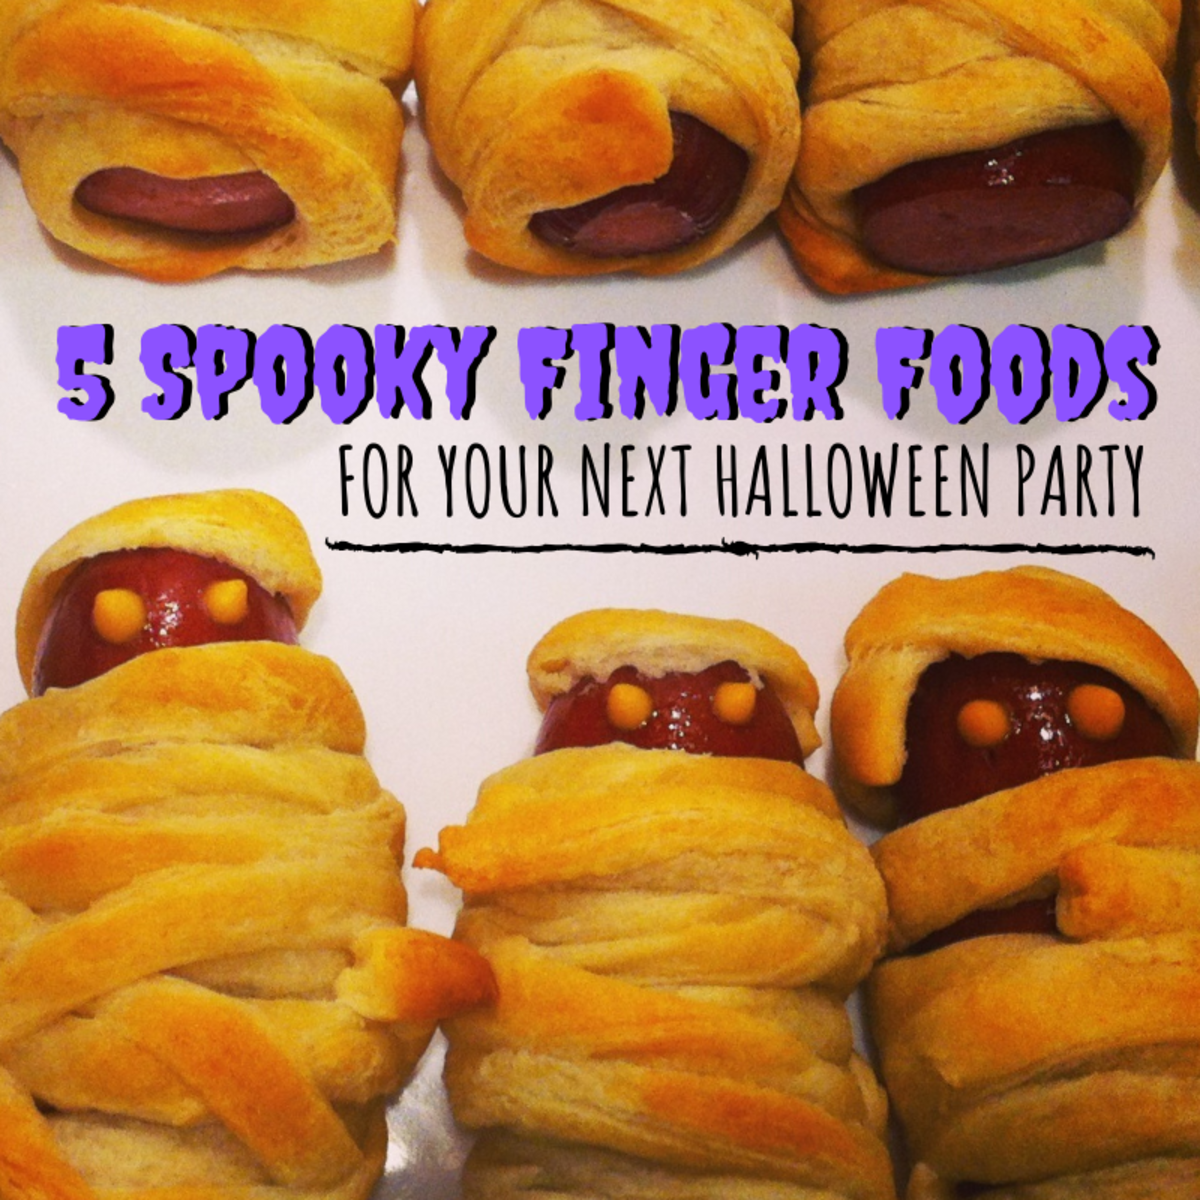 The perfect party foods are simple, delicious, and snackable. These five Halloween-themed treats will have your ghoulish guests moaning for more. 